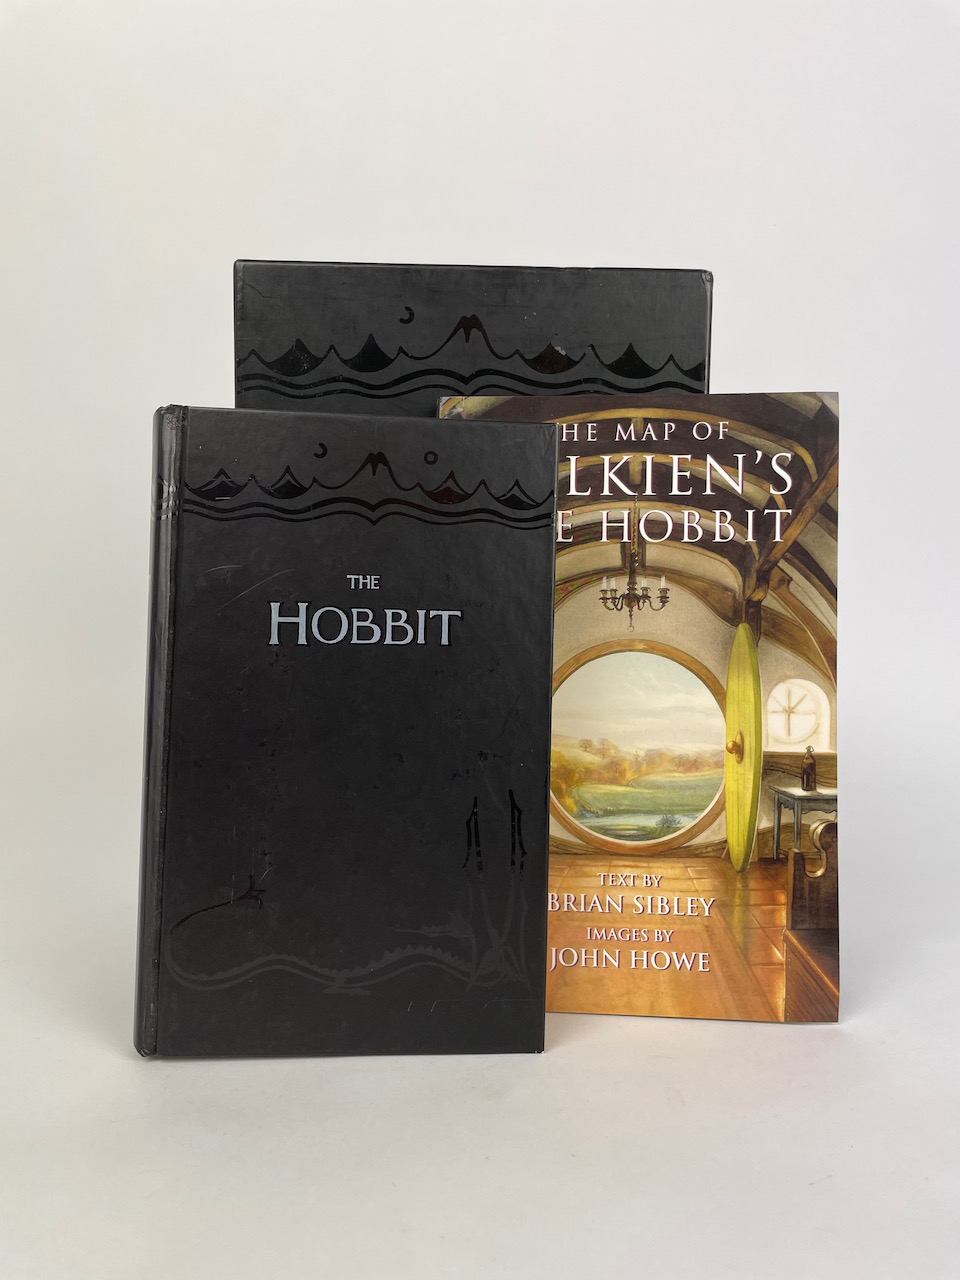 
The Hobbit, Limited Edition Collectors' Box 4